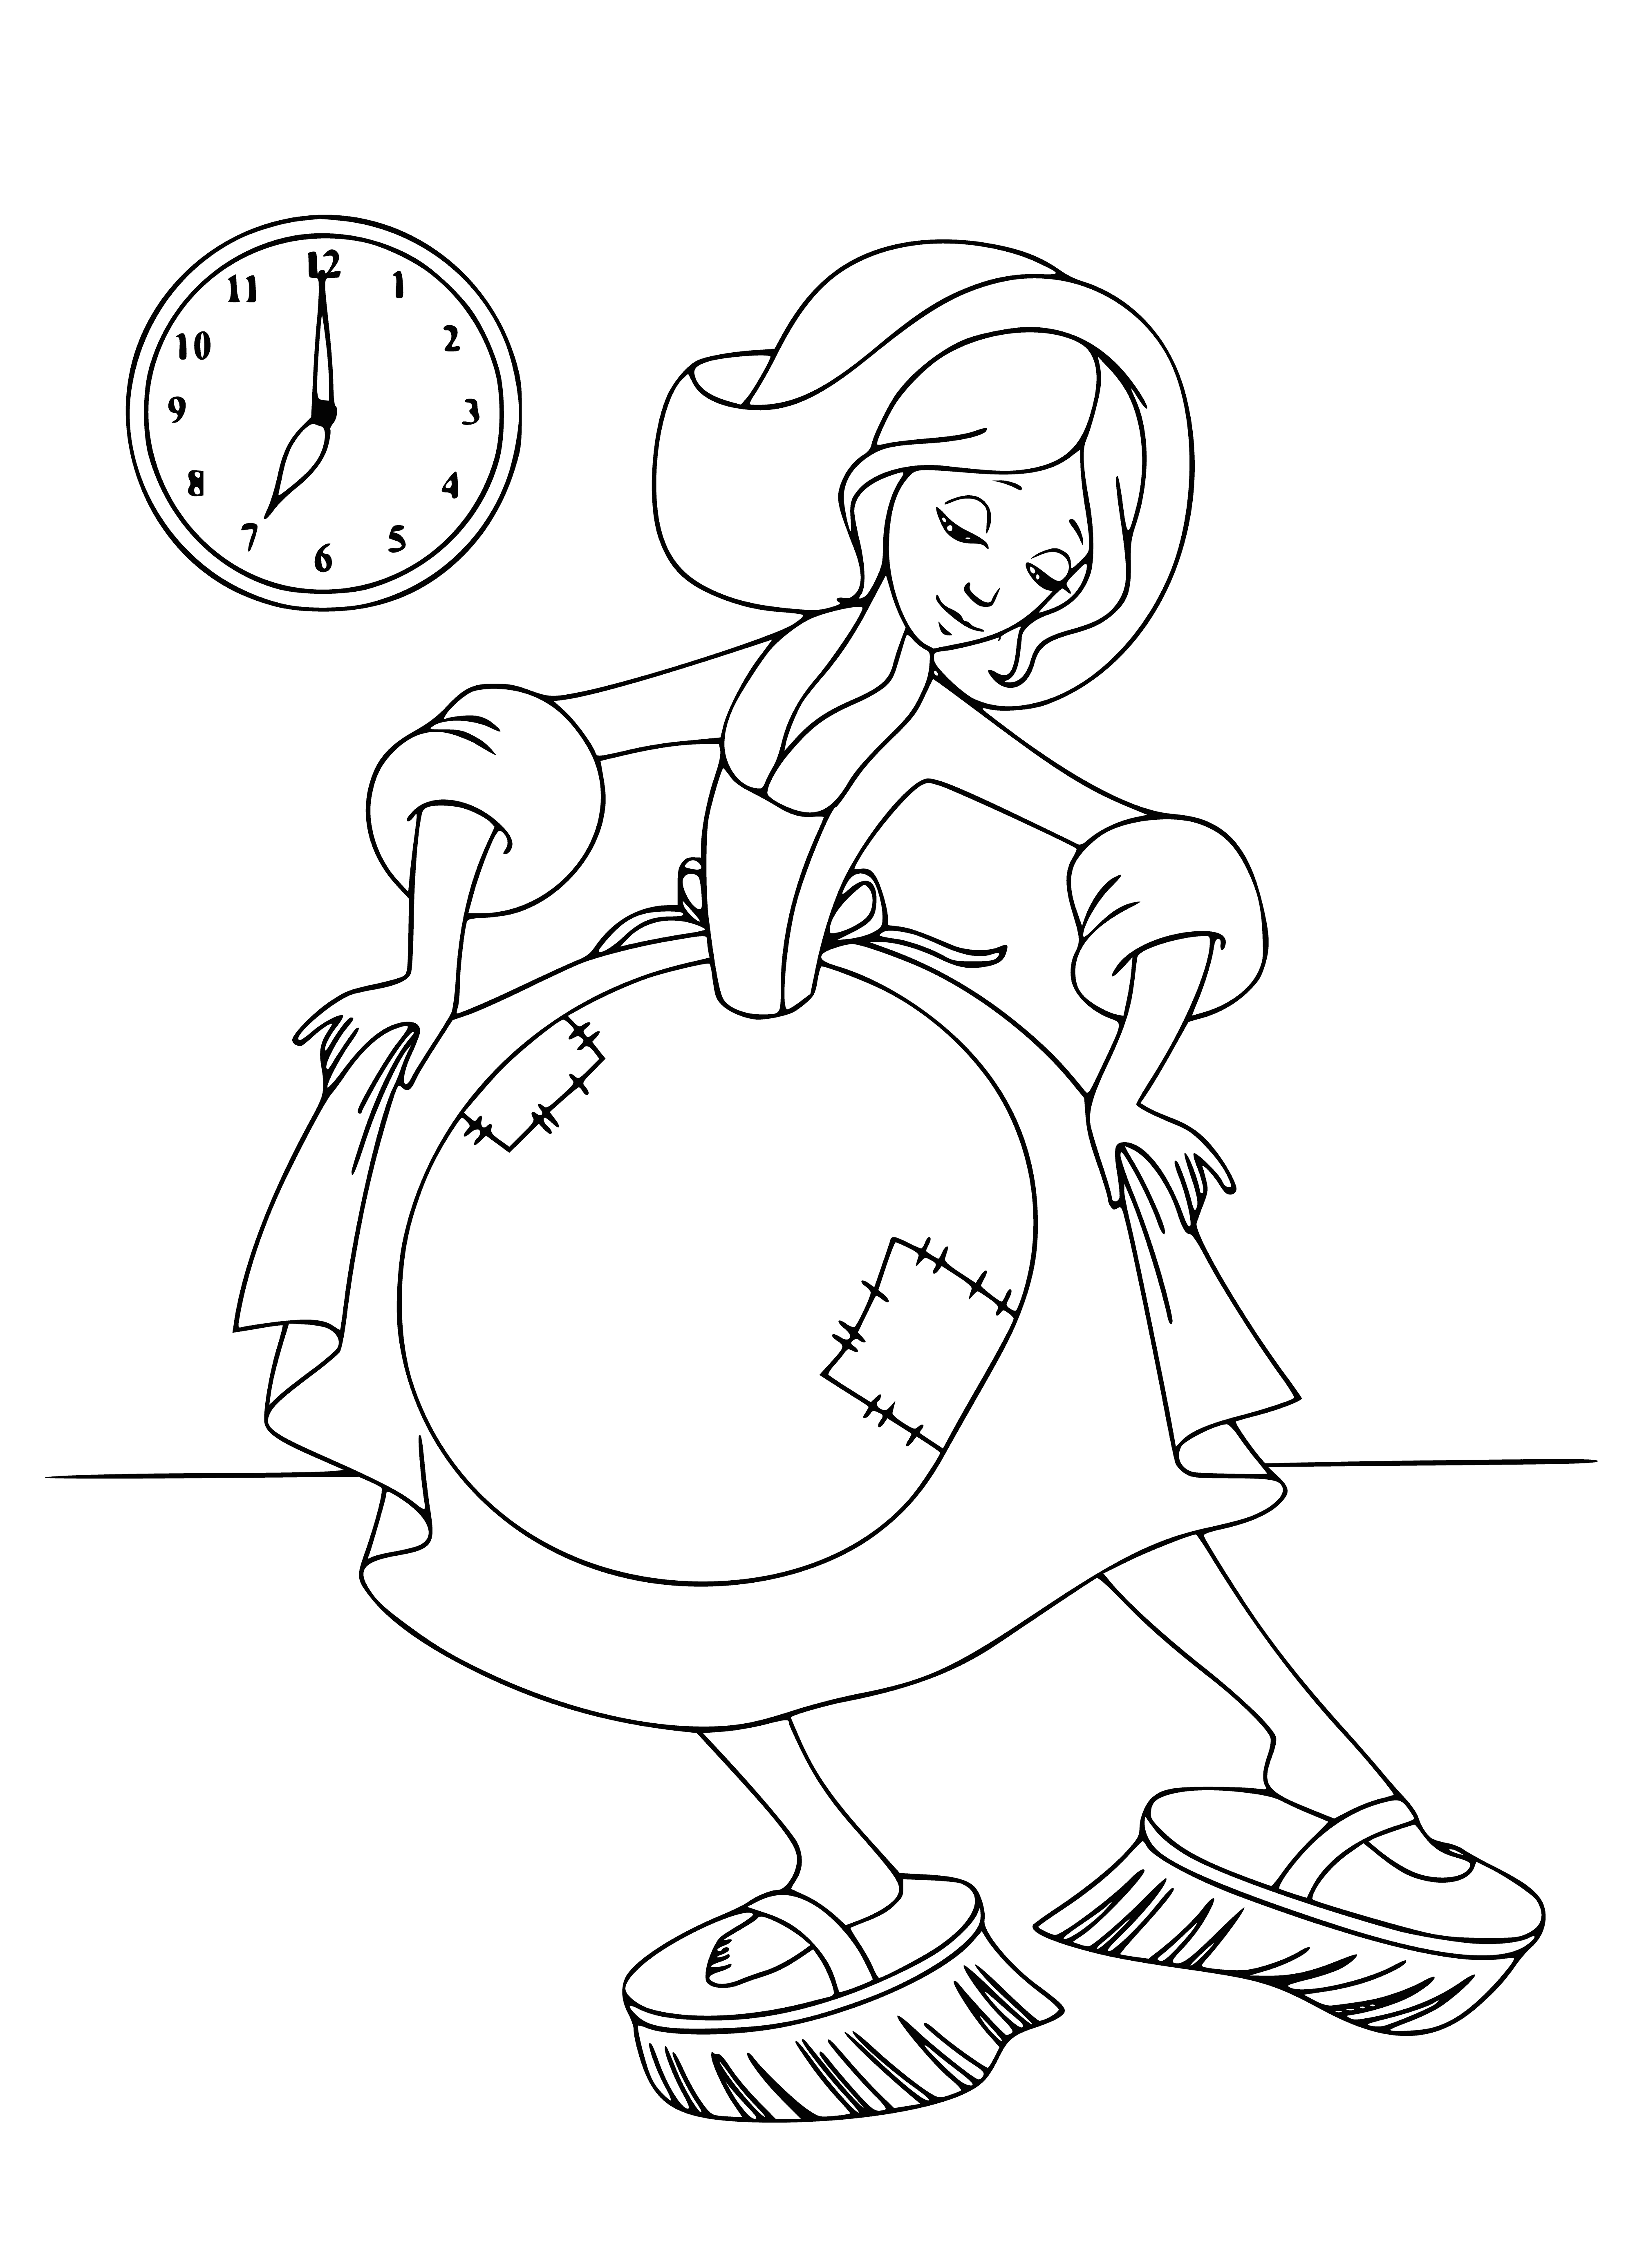 coloring page: Cinderella is mopping the floor in a blue dress, exhausted from the hard work. Her arms are moving frantically with a bucket of water nearby.